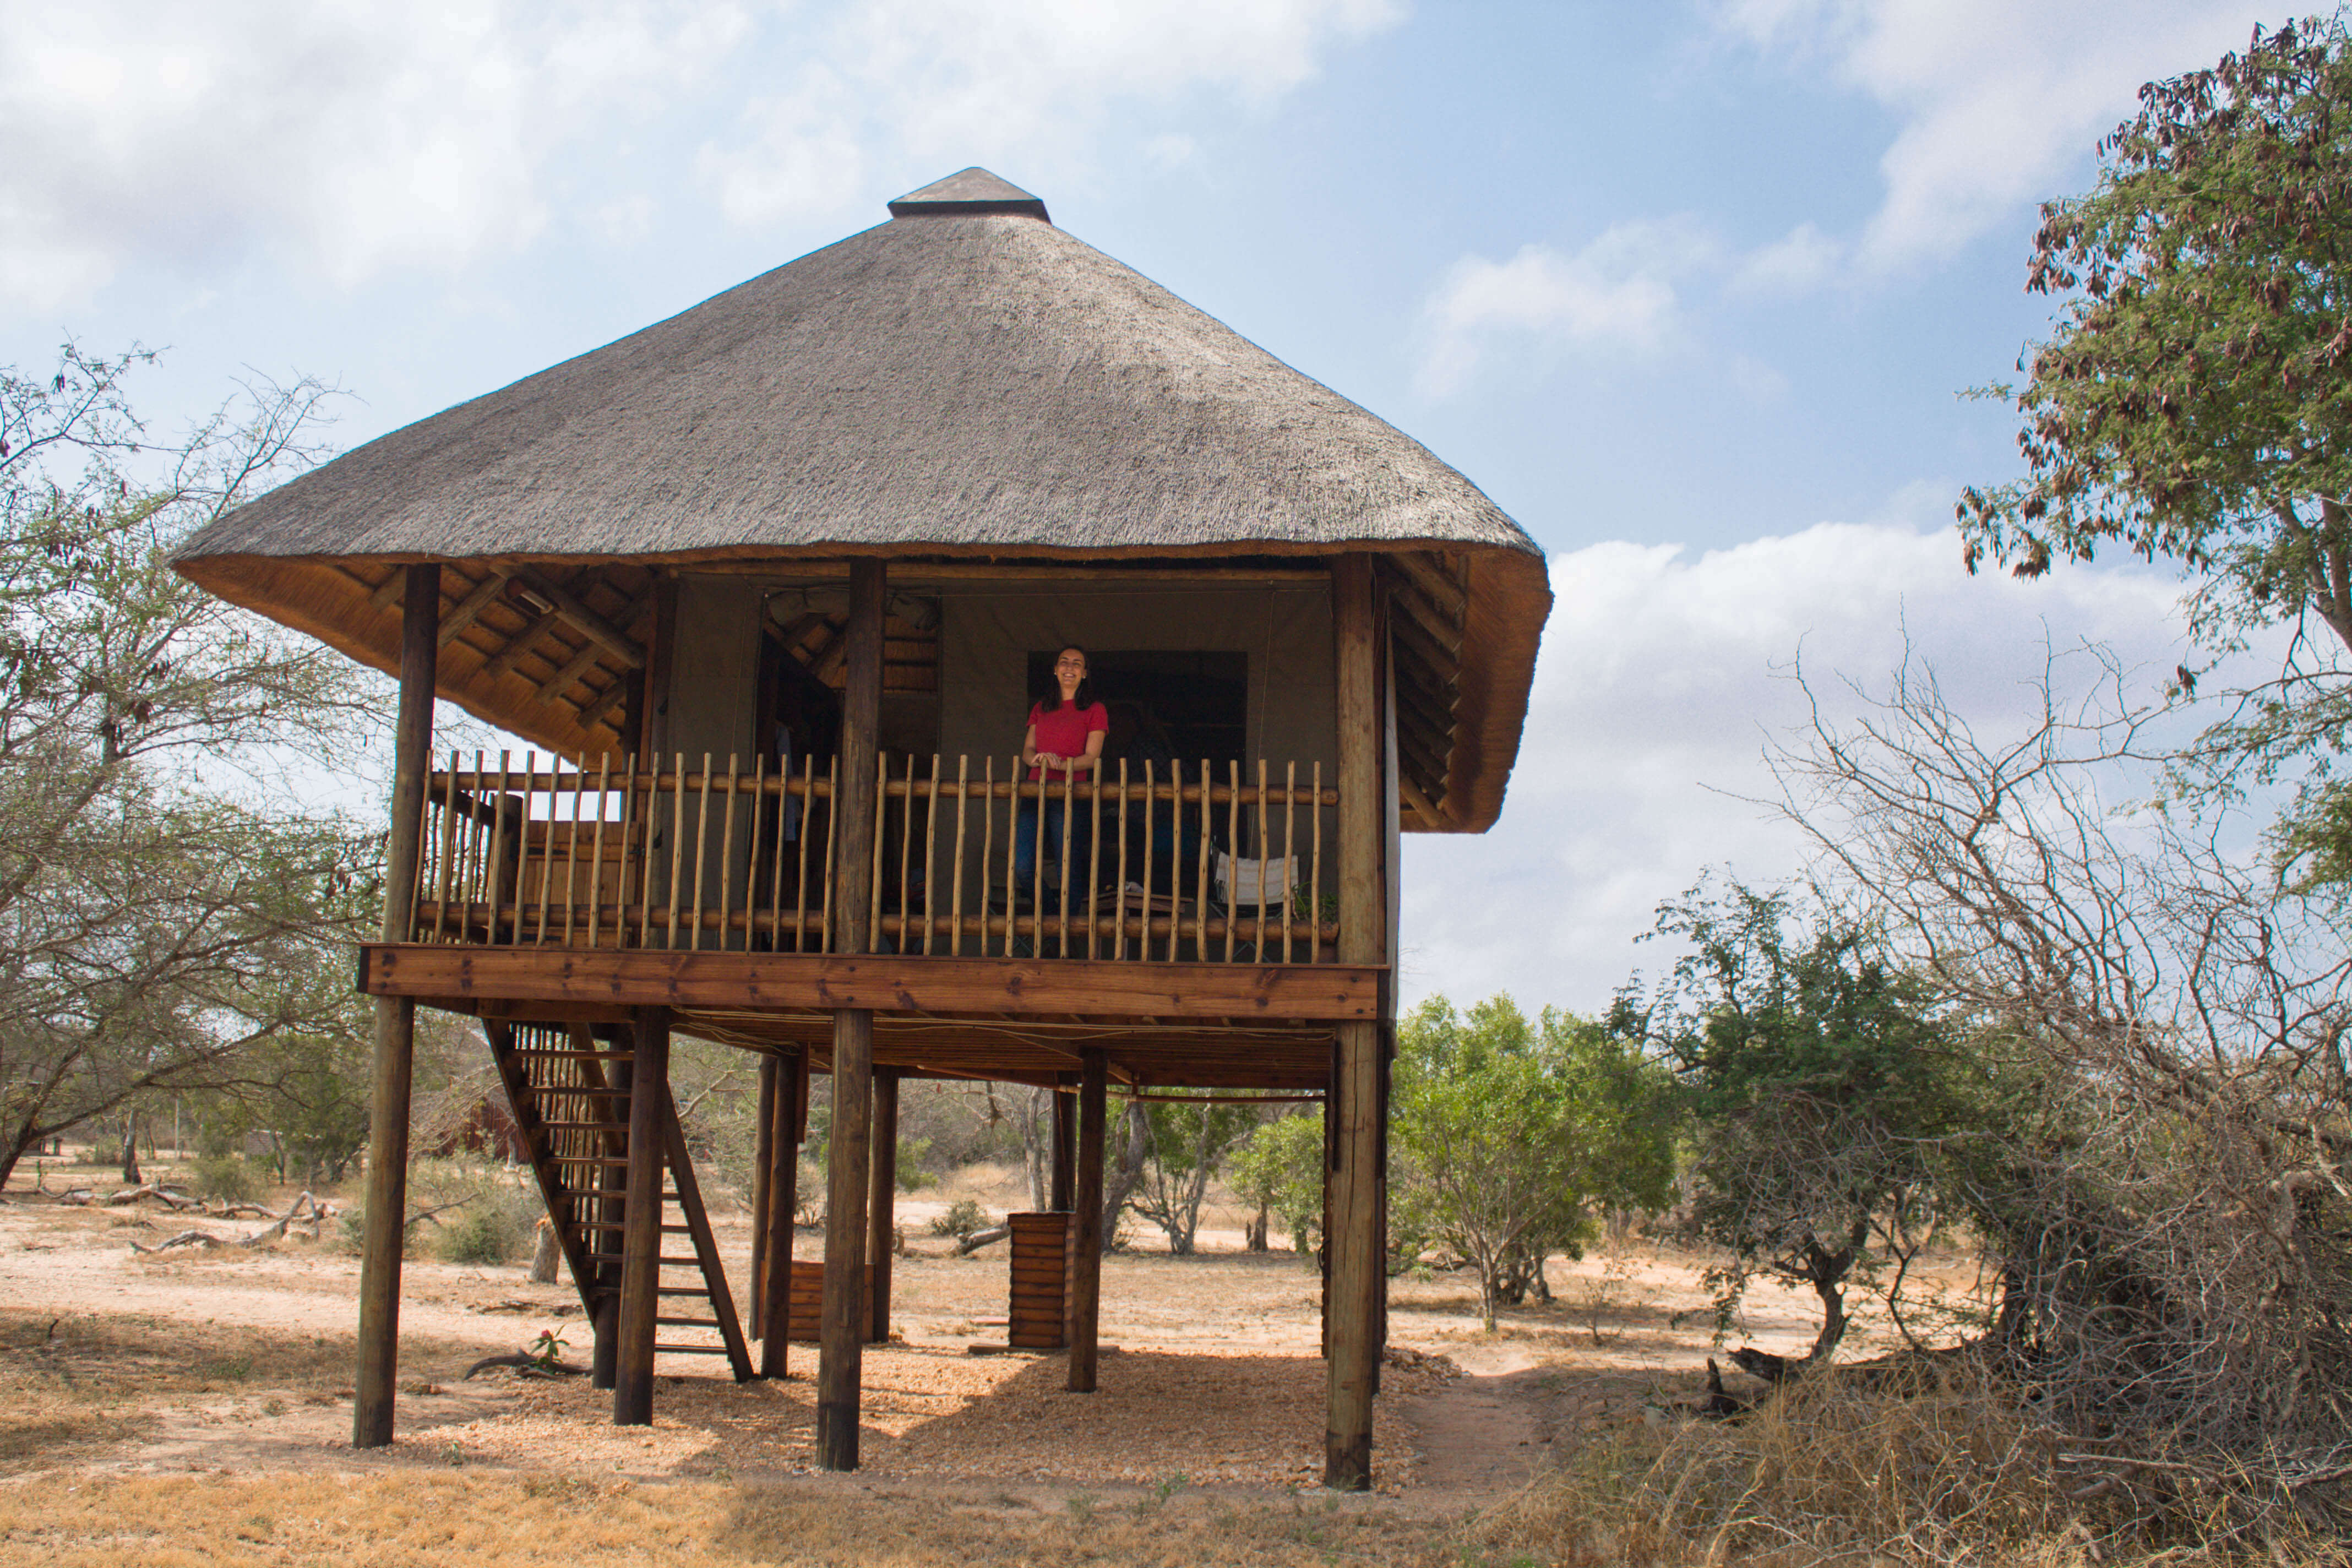 Sleeping in a treehouse in the Kruger NAtional Park, Souh Africa. Nthambo Tree Camp is located on the private concession of Klaserie